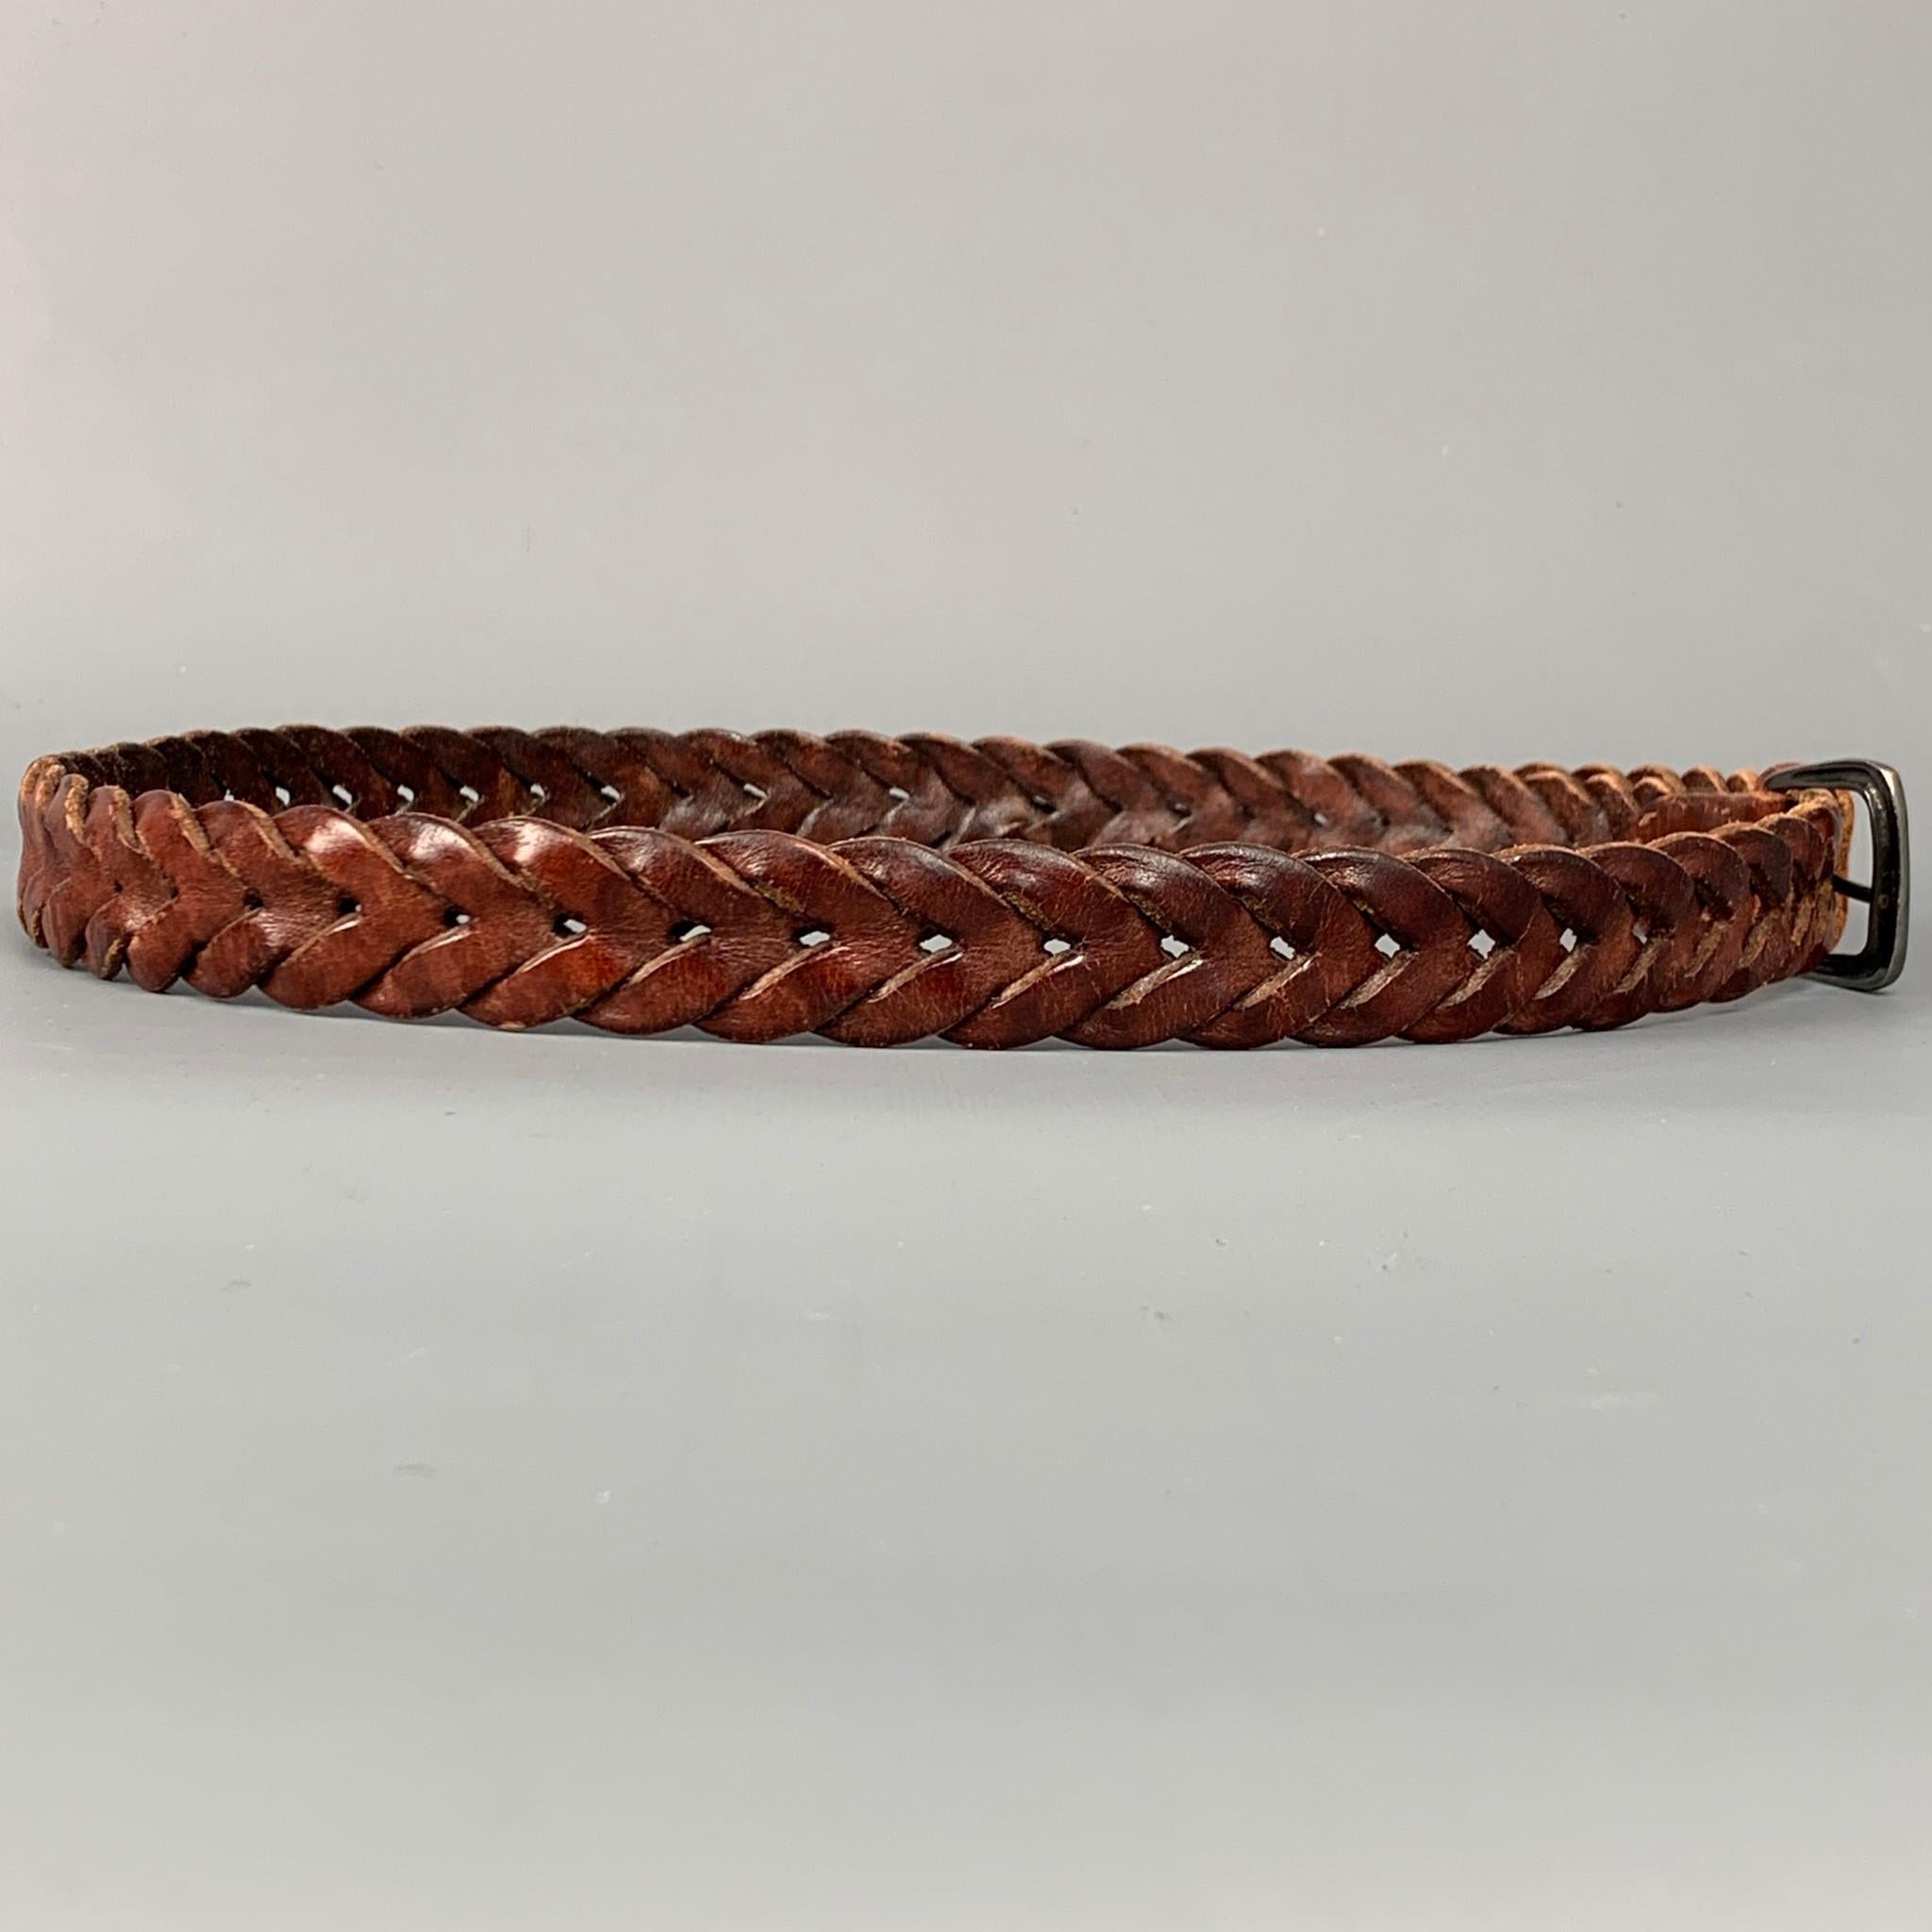 RALPH LAUREN belt comes in a brown woven leather featuring a sterling silver tip detail and buckle. Made in England.

Very Good Pre-Owned Condition.
Marked: 36/90

Length: 43 in.
Width: 0.75 in.
Buckle: 1.5 in. 